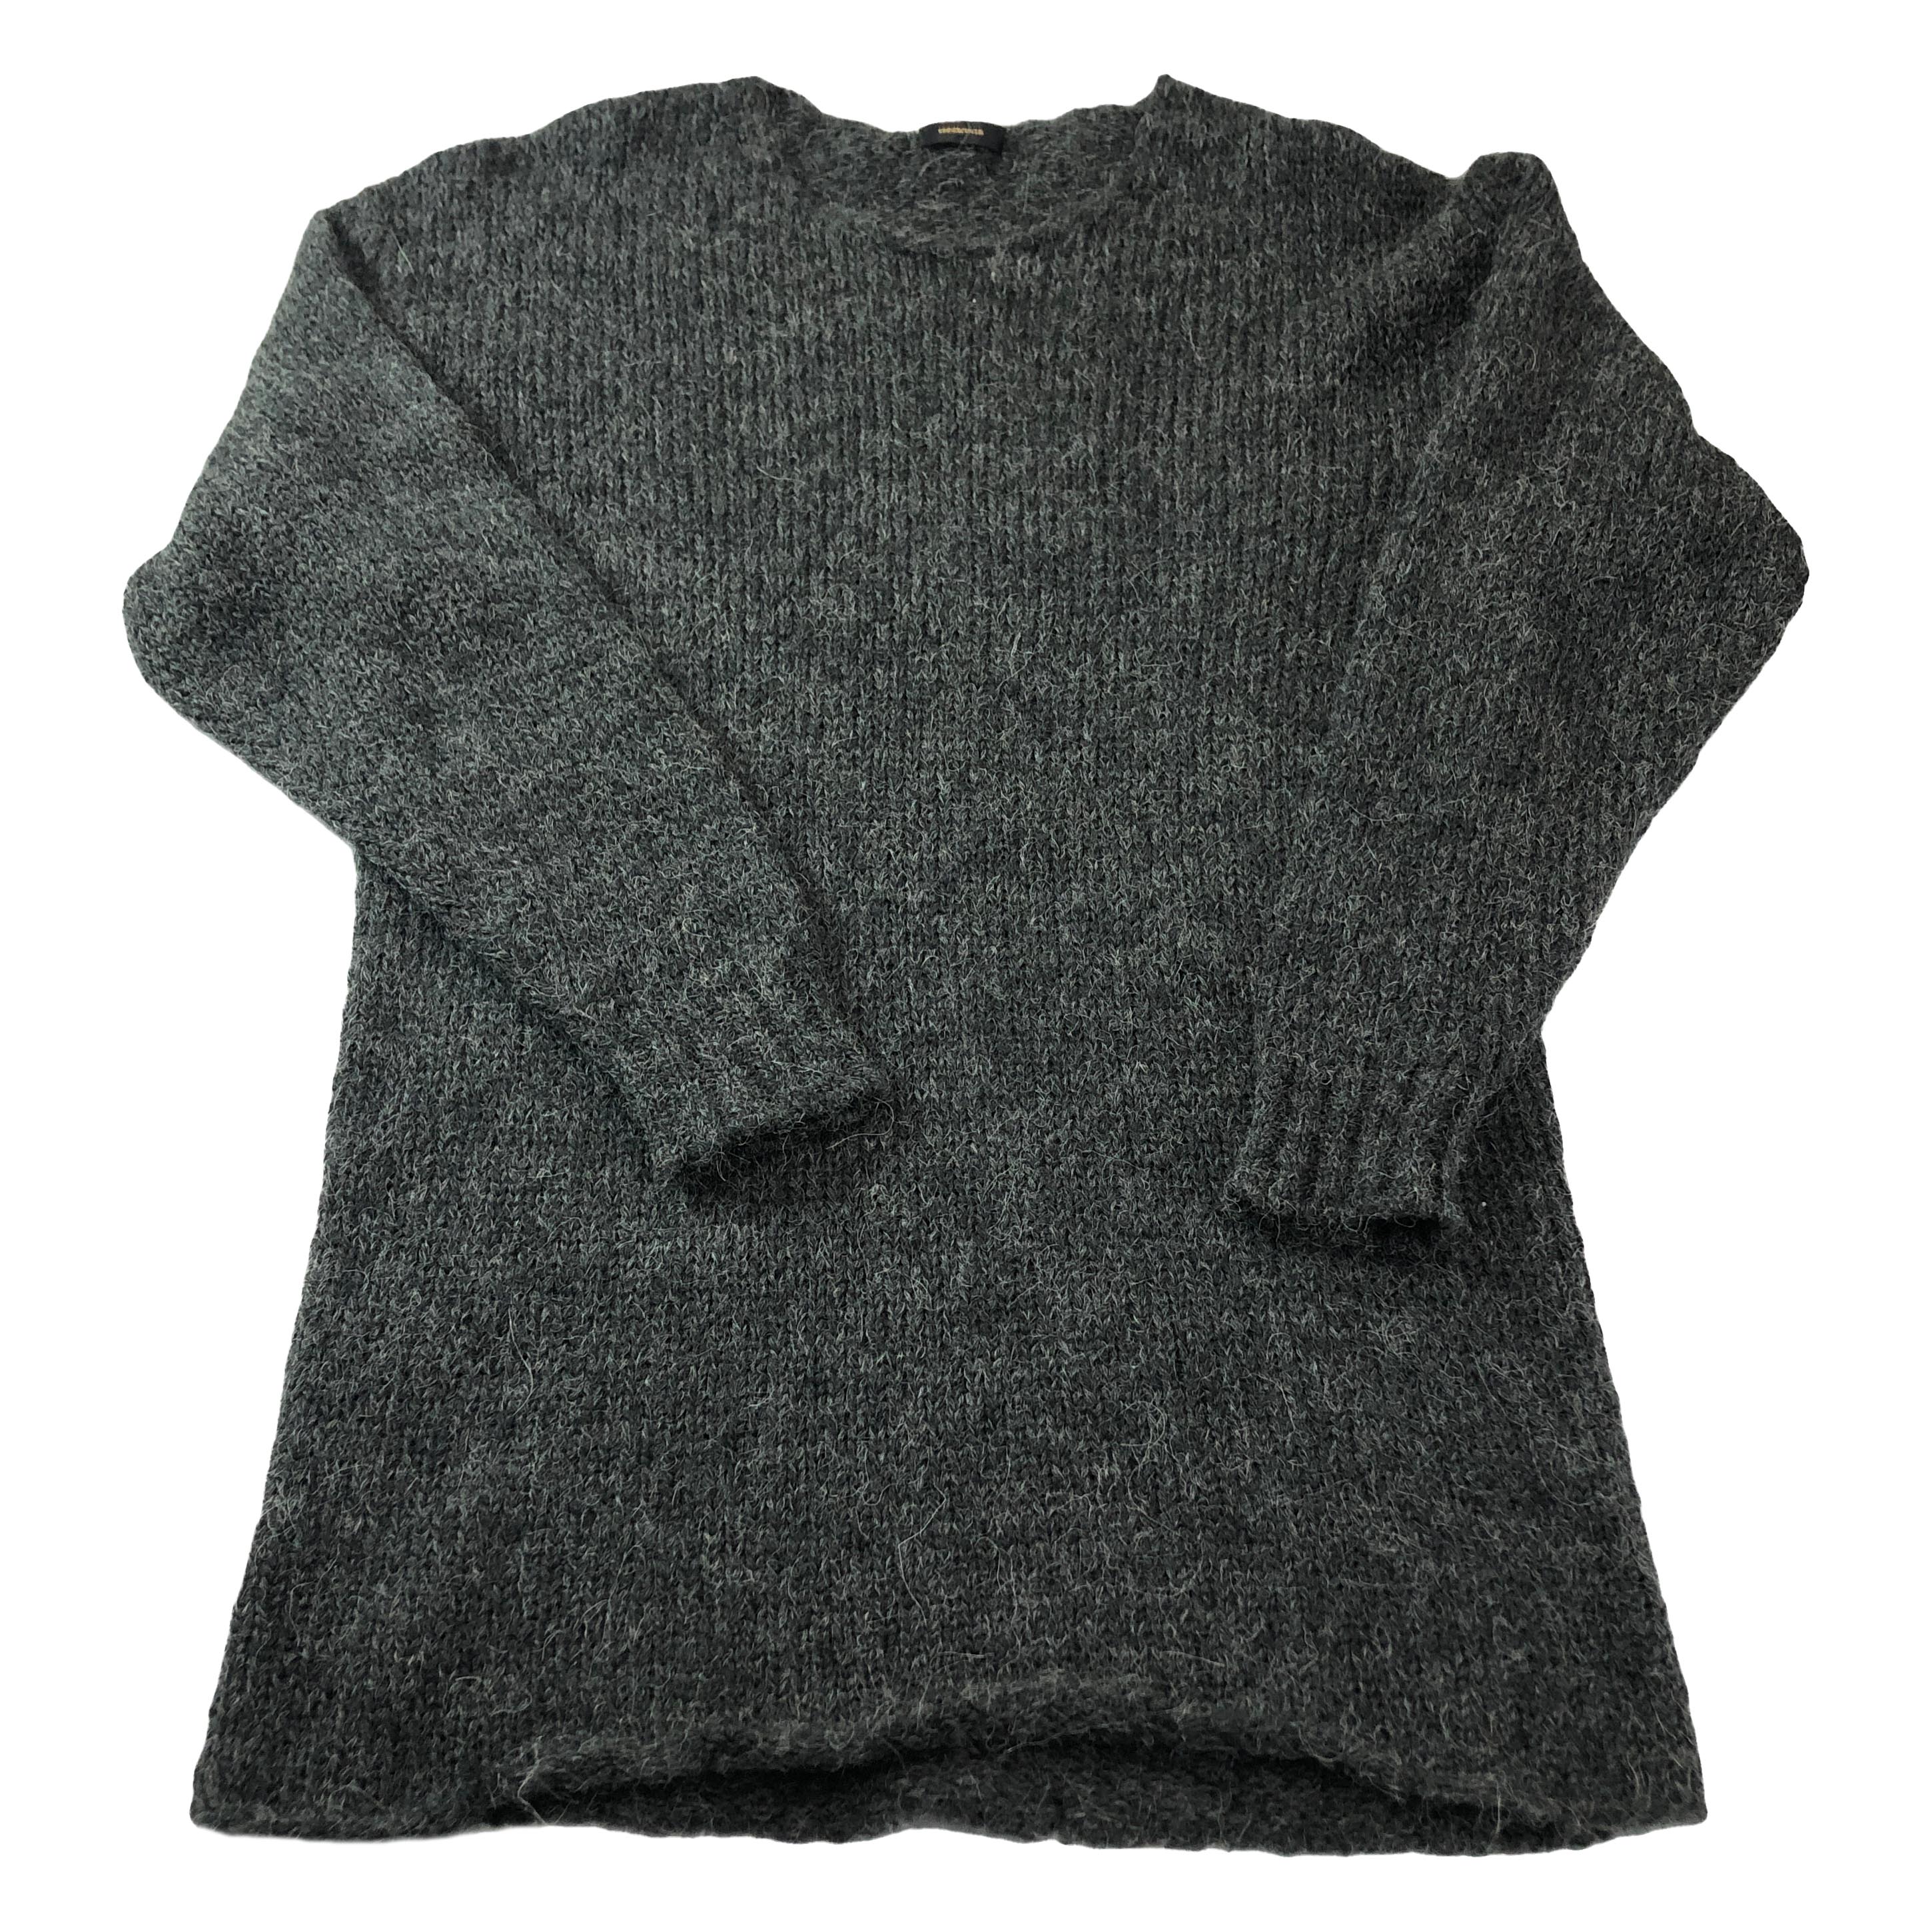 [Undercover] Mohair sweater - Size 2